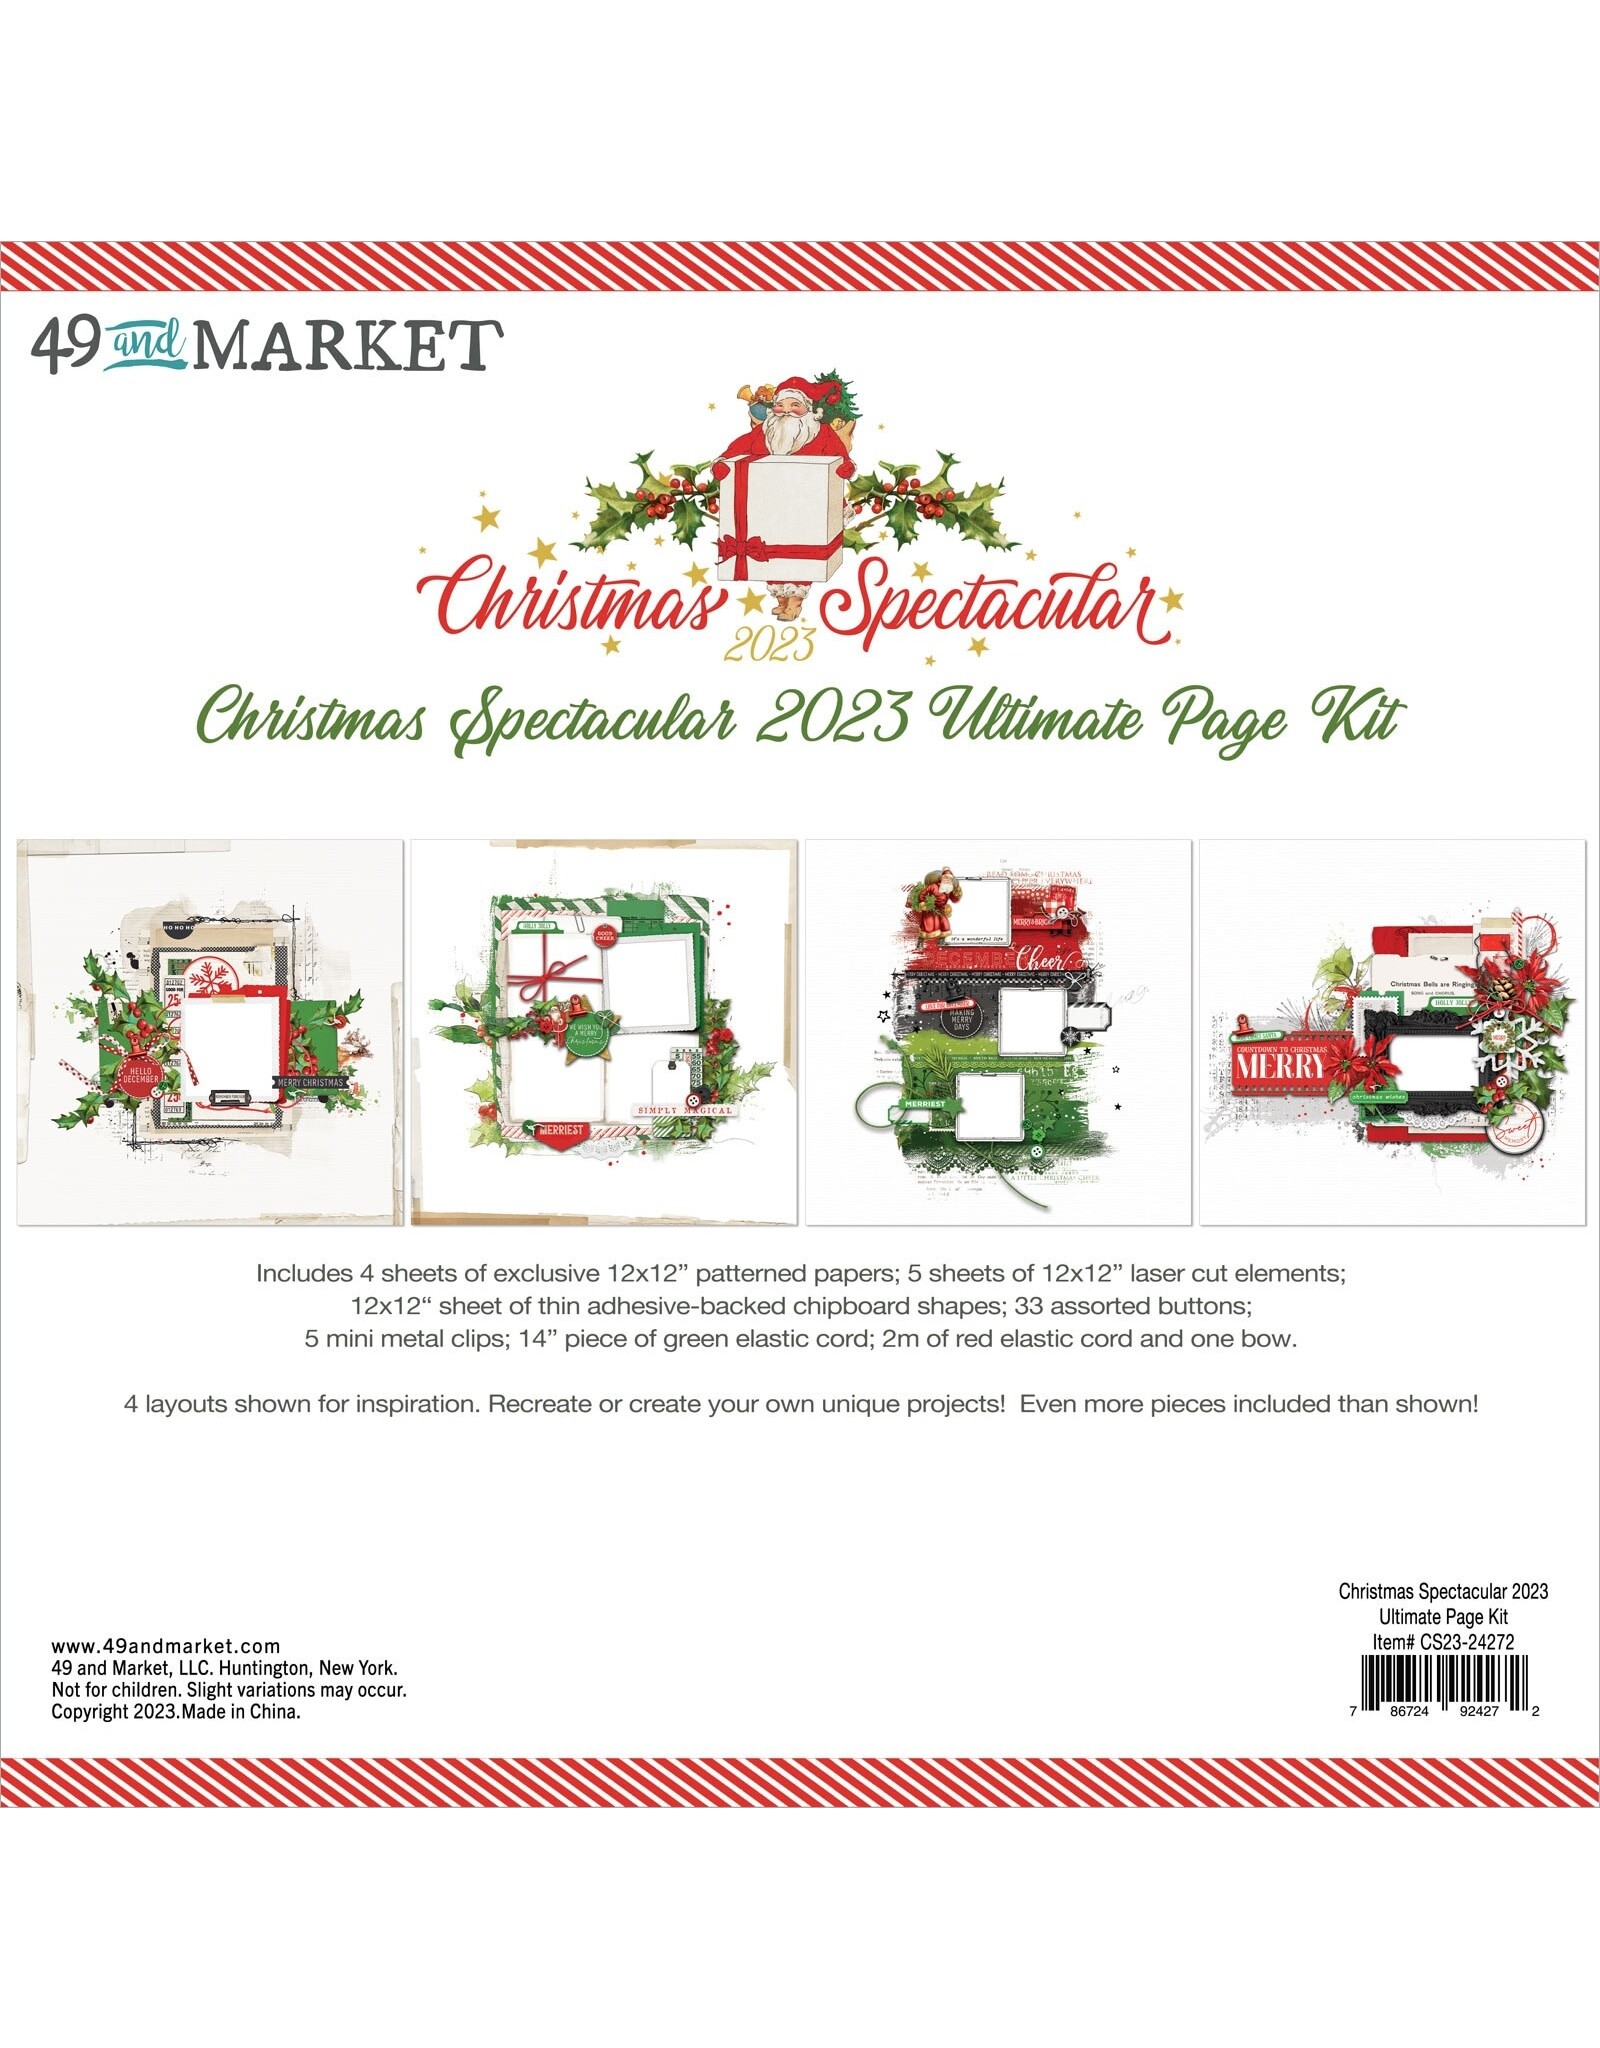 49 AND MARKET Christmas Spectacular 2023 - Ultimate Page Kit